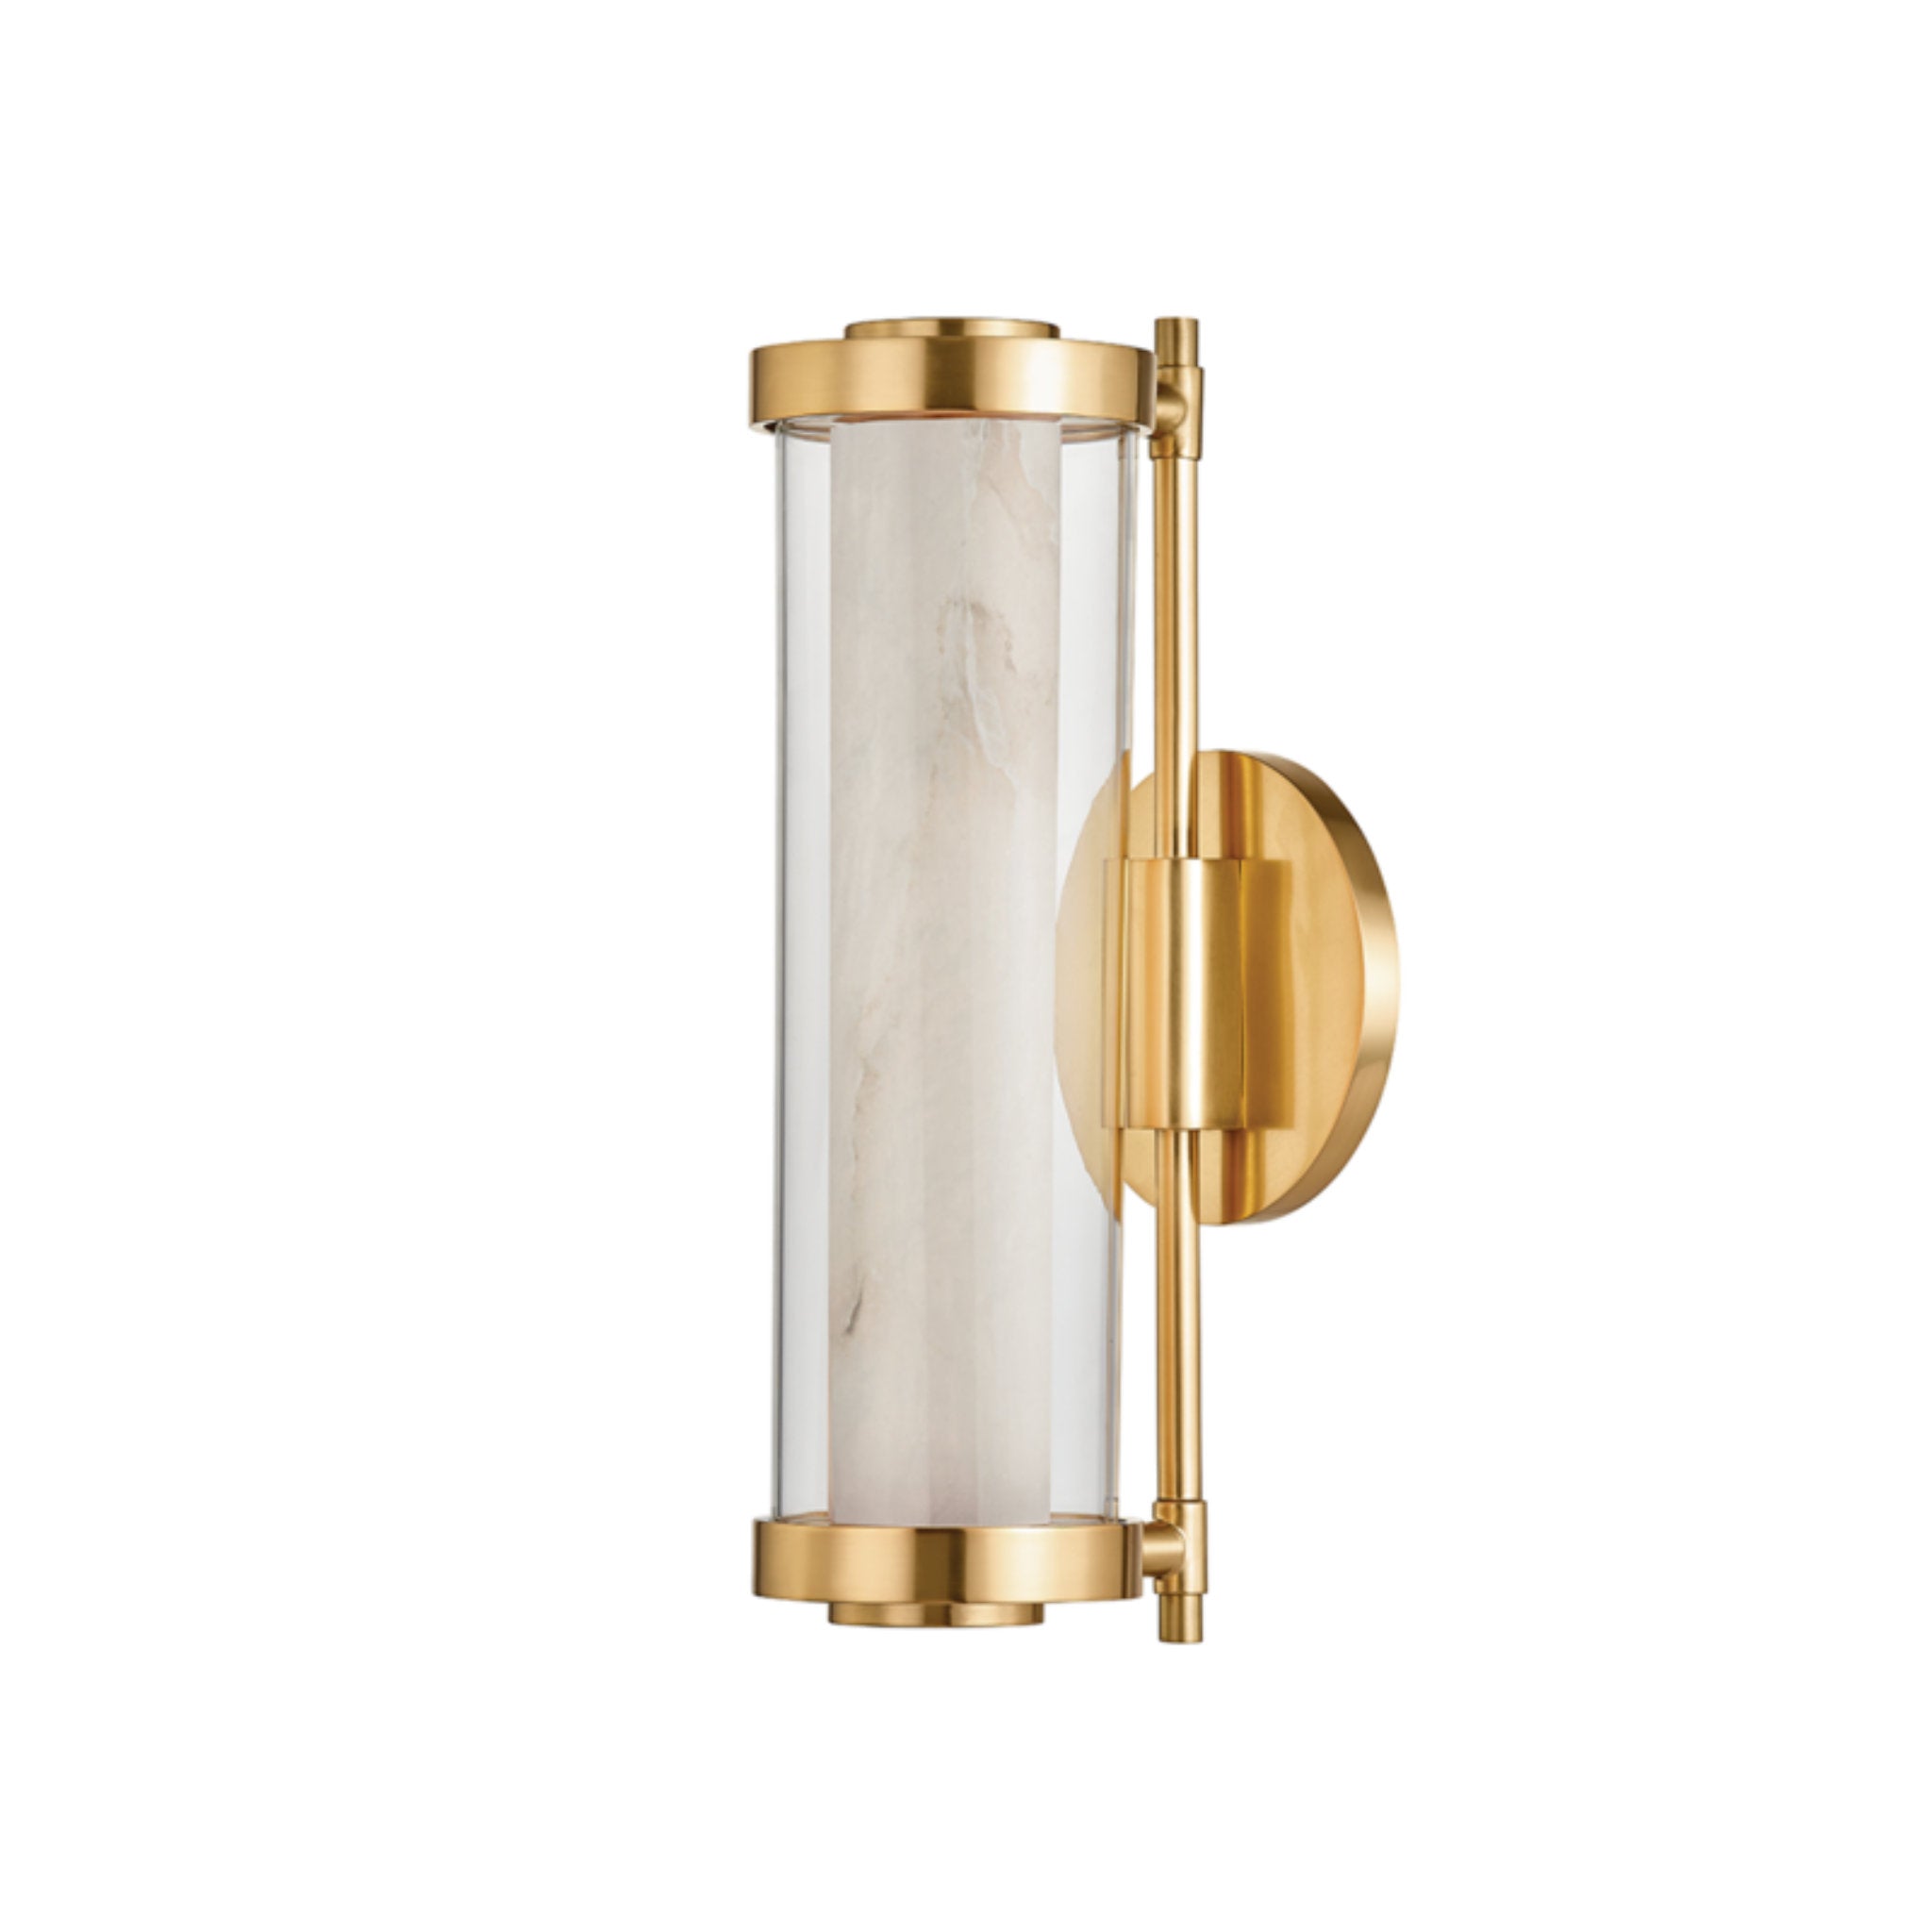 Caterina 1 Light Wall Sconce in Vintage Brass